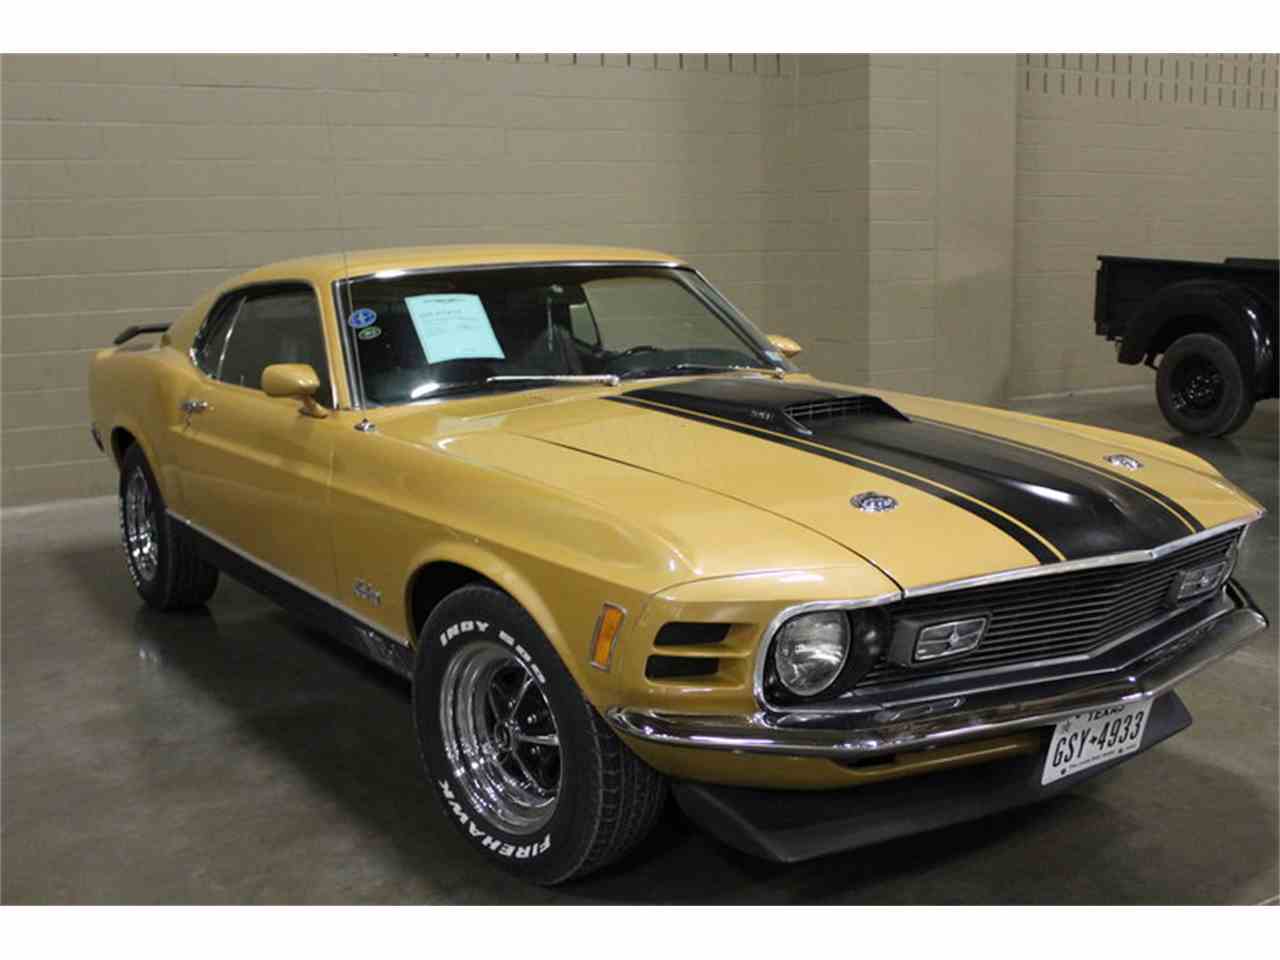 1970 Ford Mustang Mach 1 for Sale | ClassicCars.com | CC-1023879